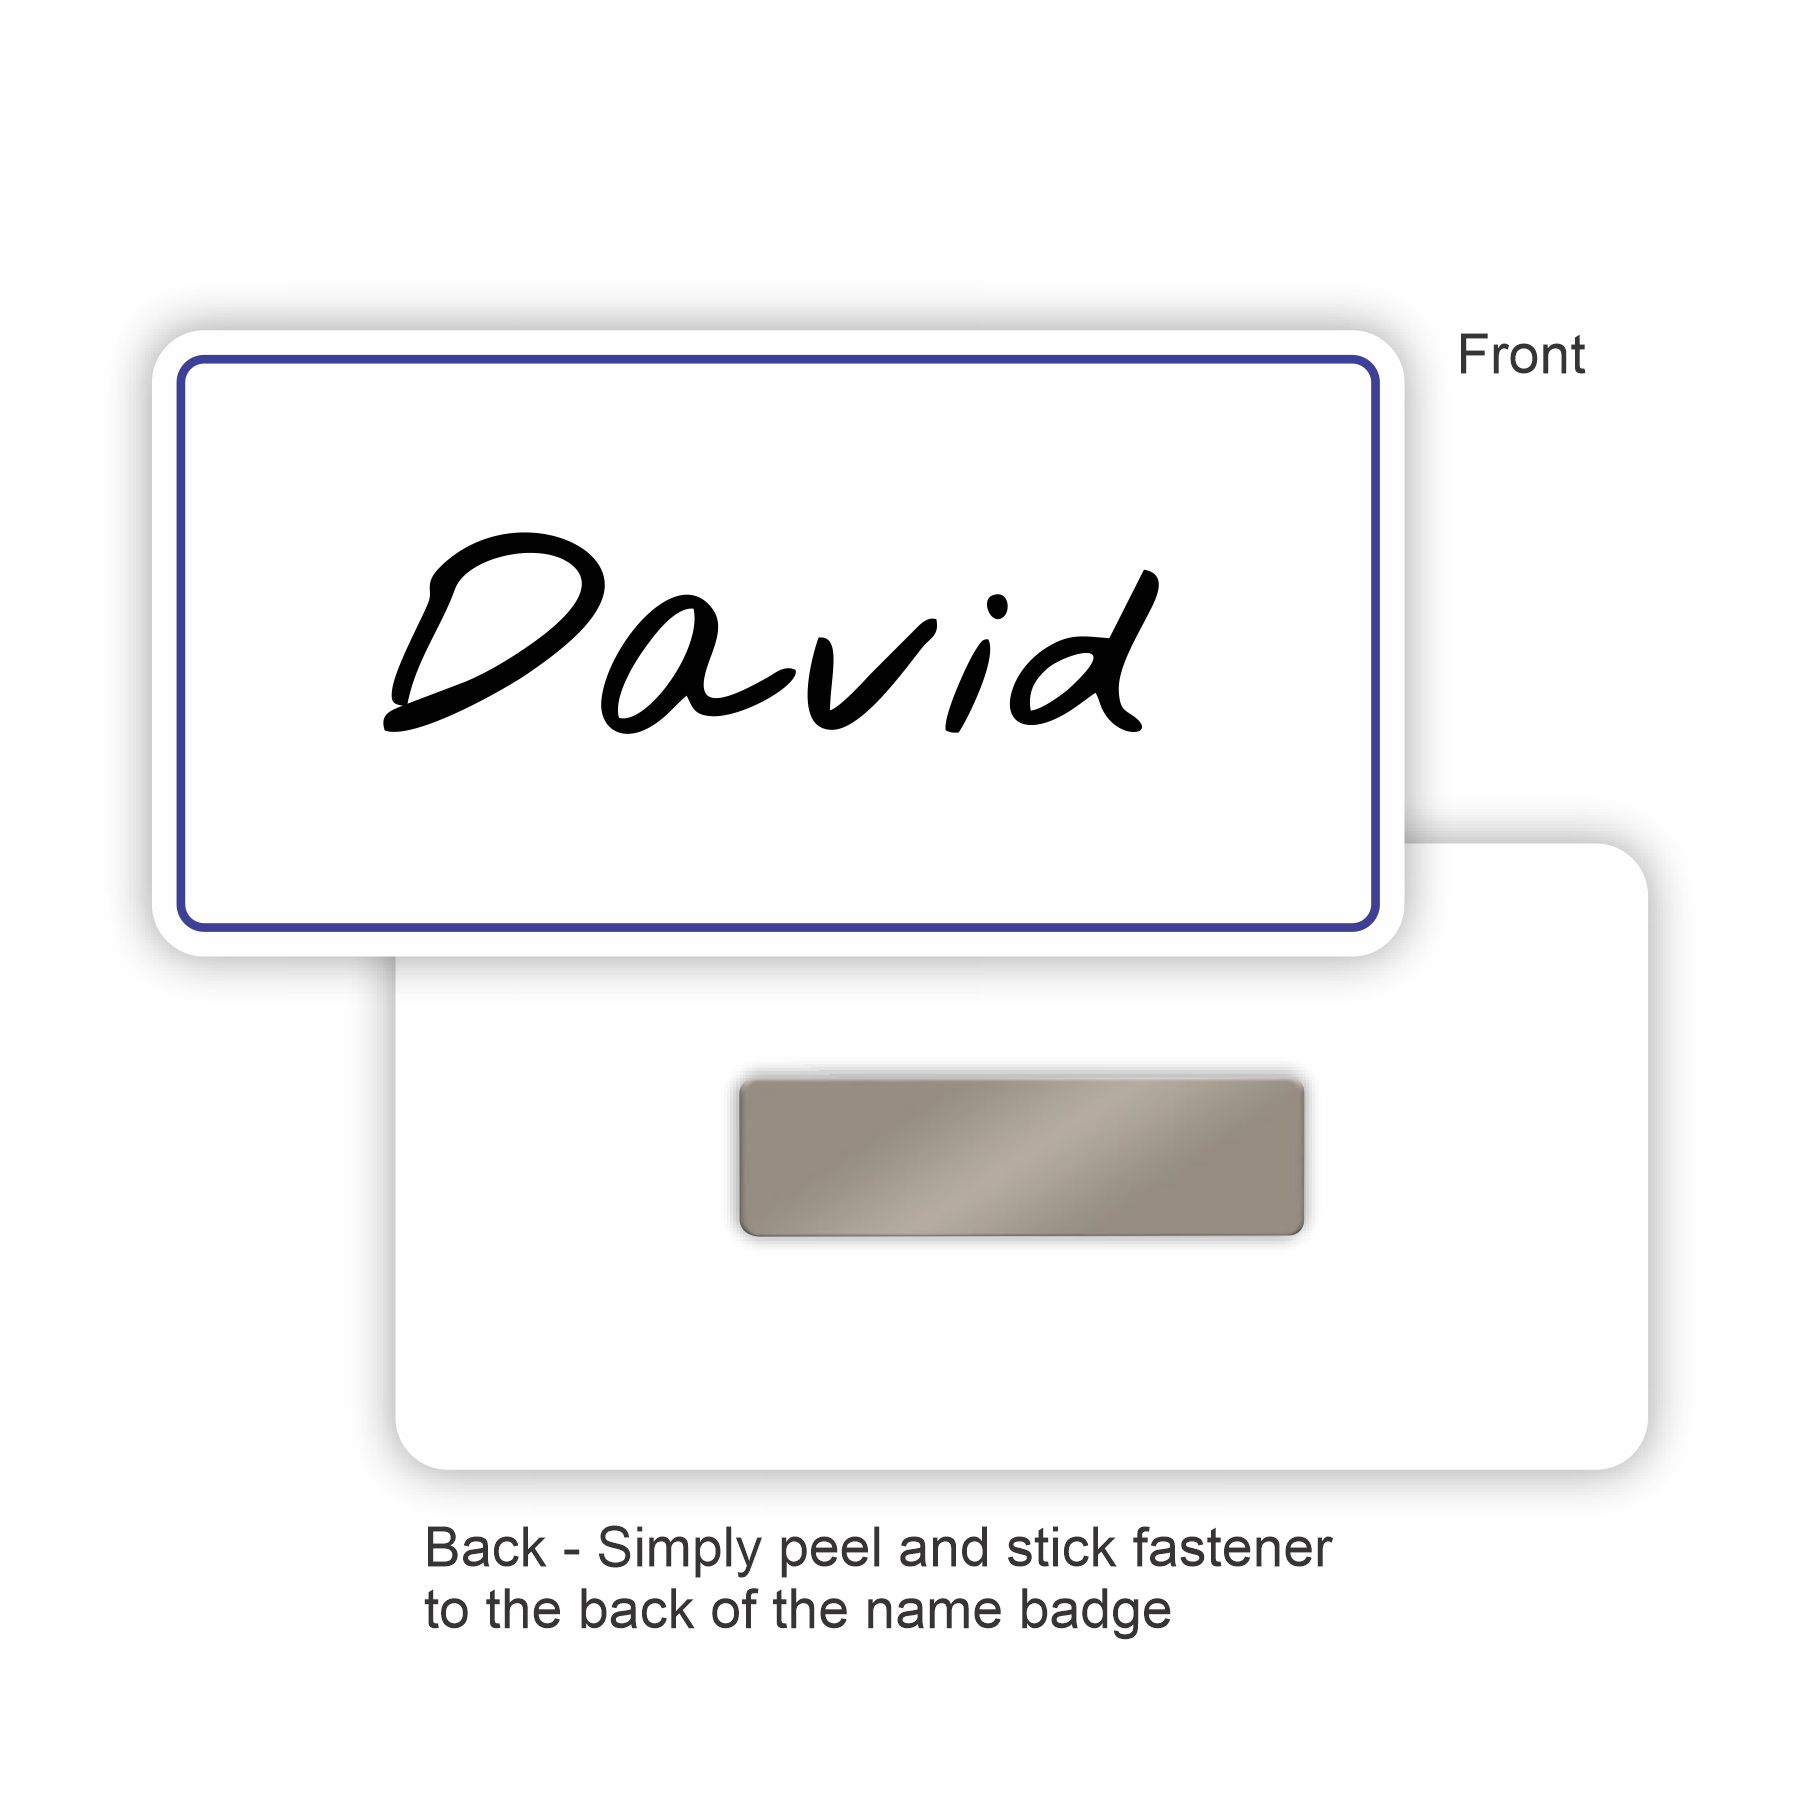 U 50 BLANK 1 1/4 X 3 WHITE/RED NAME BADGE KIT ROUNDED CORNERS CLEAR LABELS 